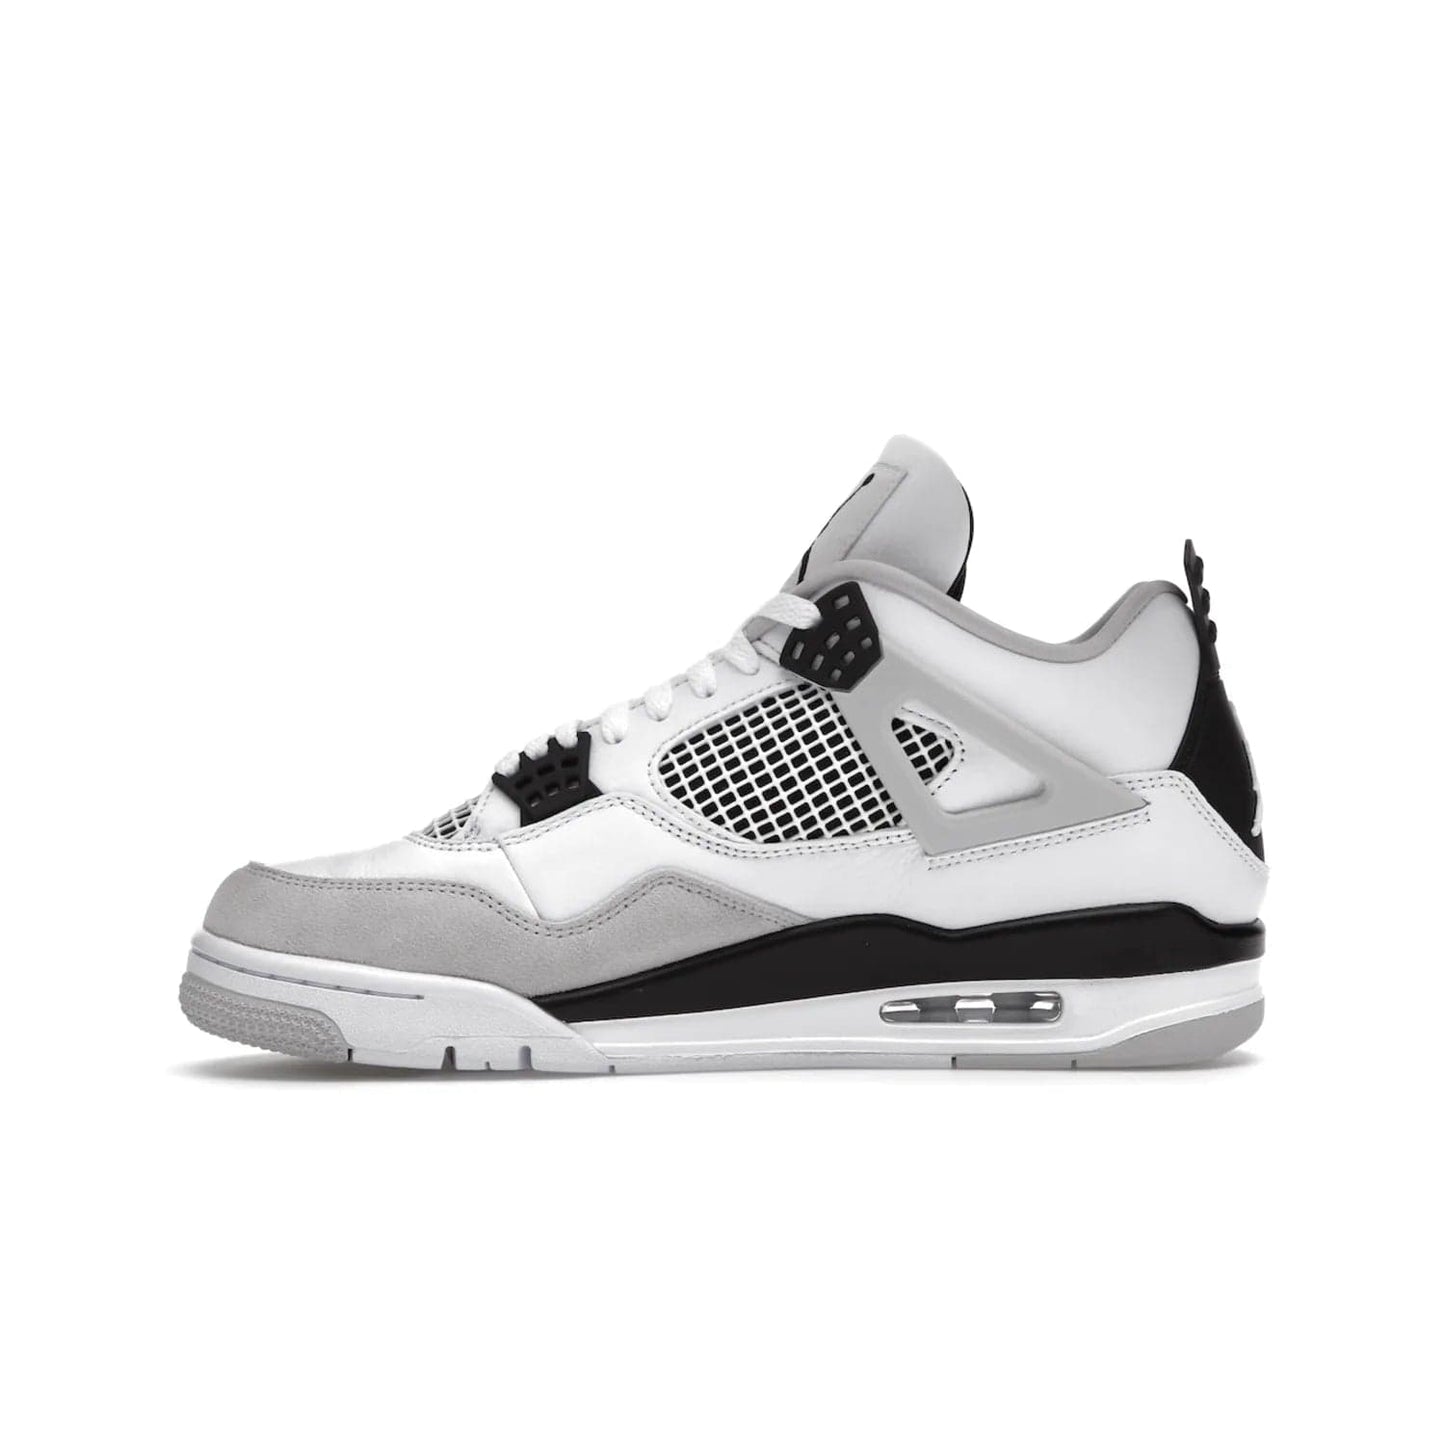 Jordan 4 Retro Military Black - Image 19 - Only at www.BallersClubKickz.com - Updated Air Jordan 4 style with a white/black/light grey sole and visible Air unit. Released in May 2022, offering timeless classic style and comfort.